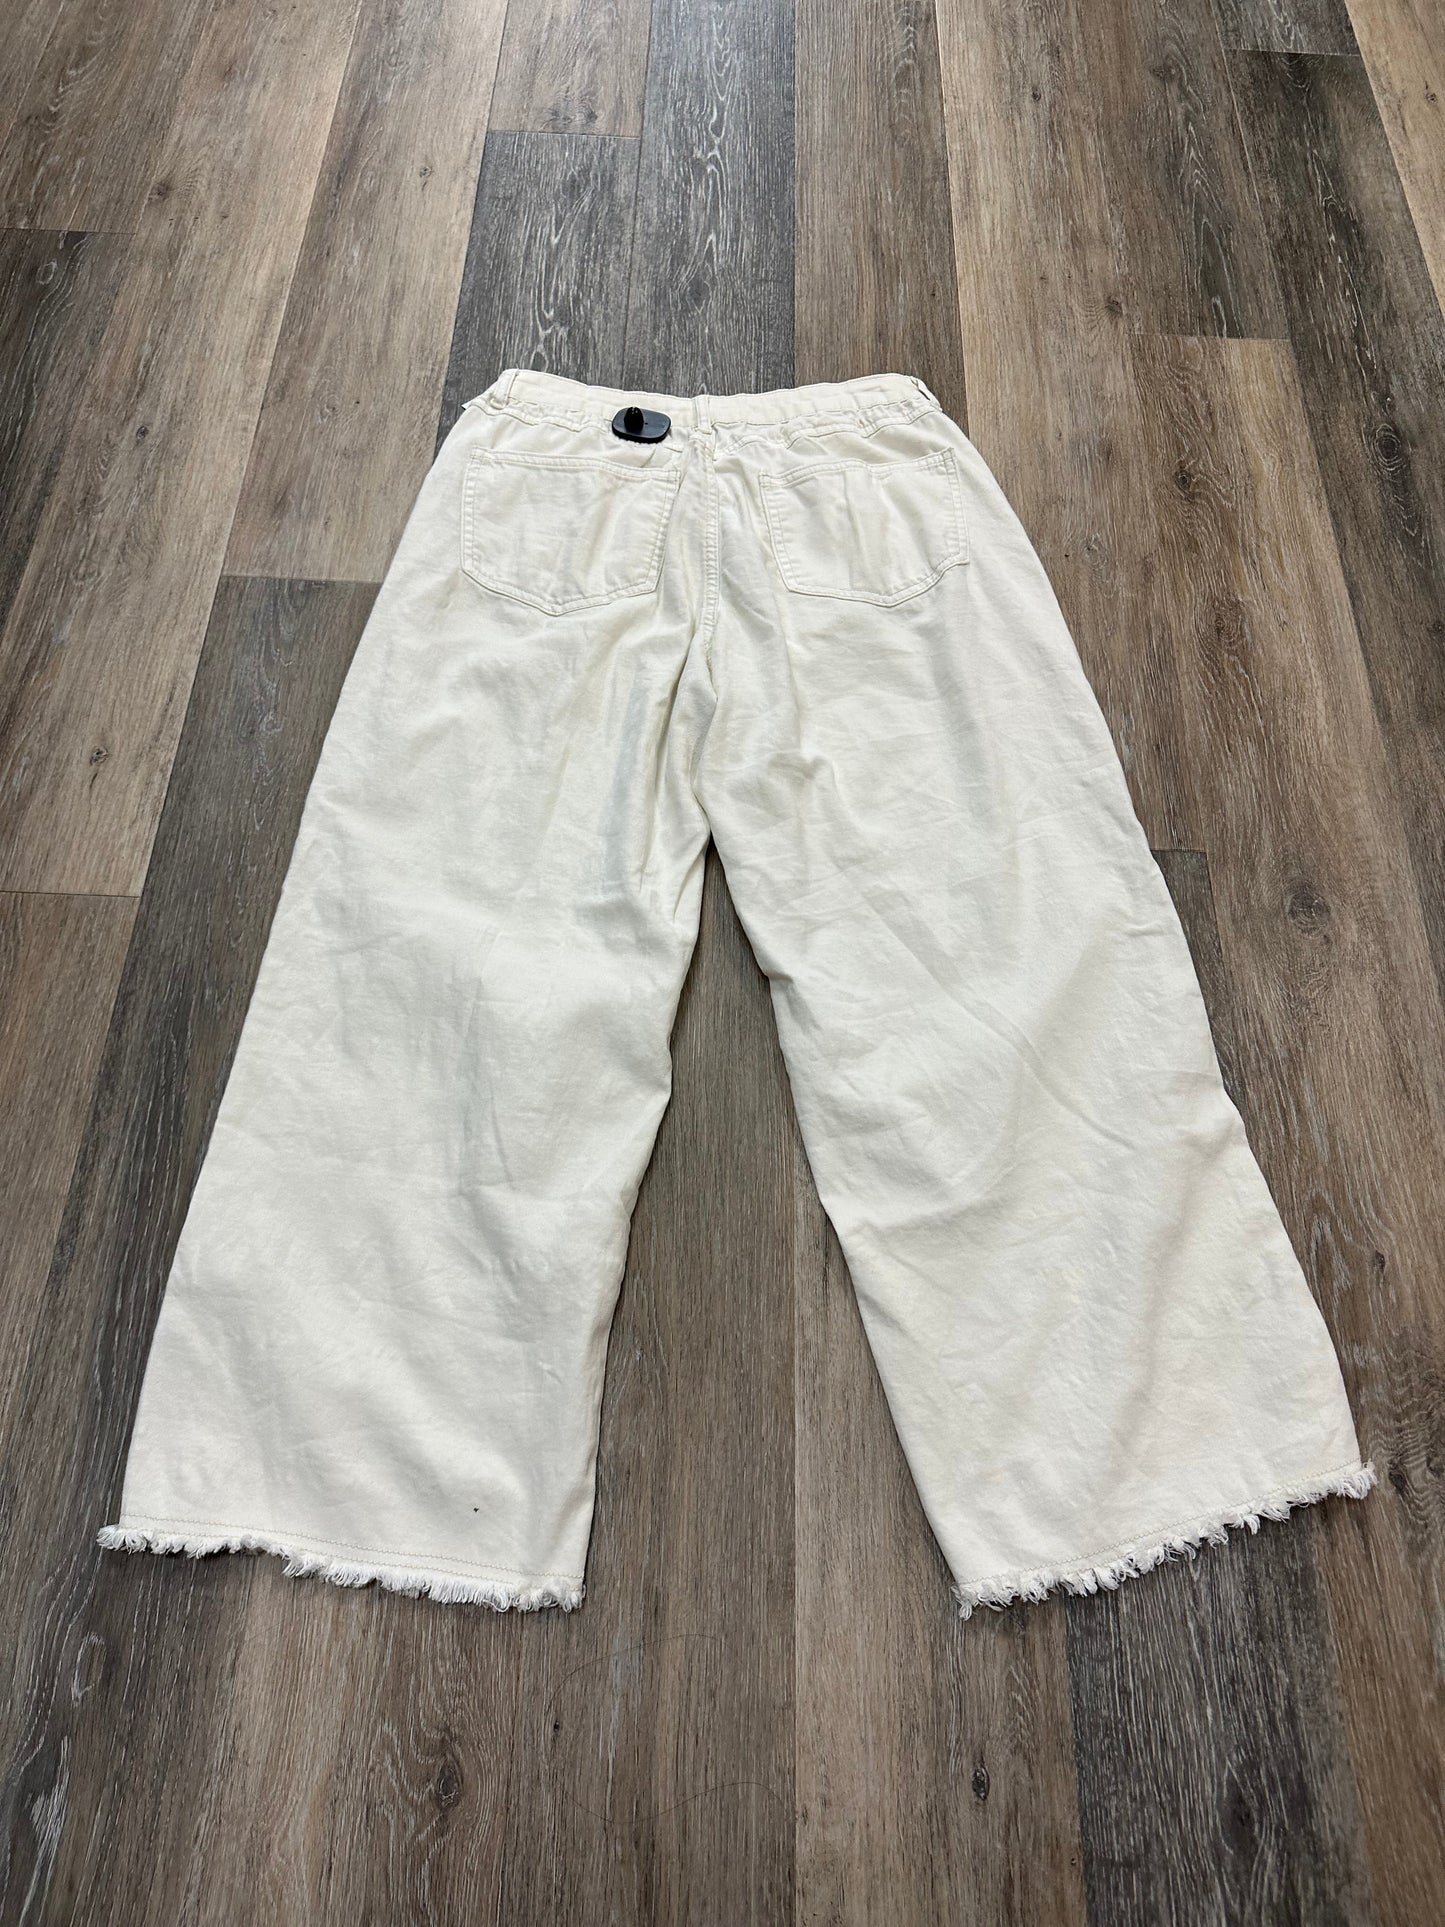 Cream Pants Ankle Charlie B, Size 8